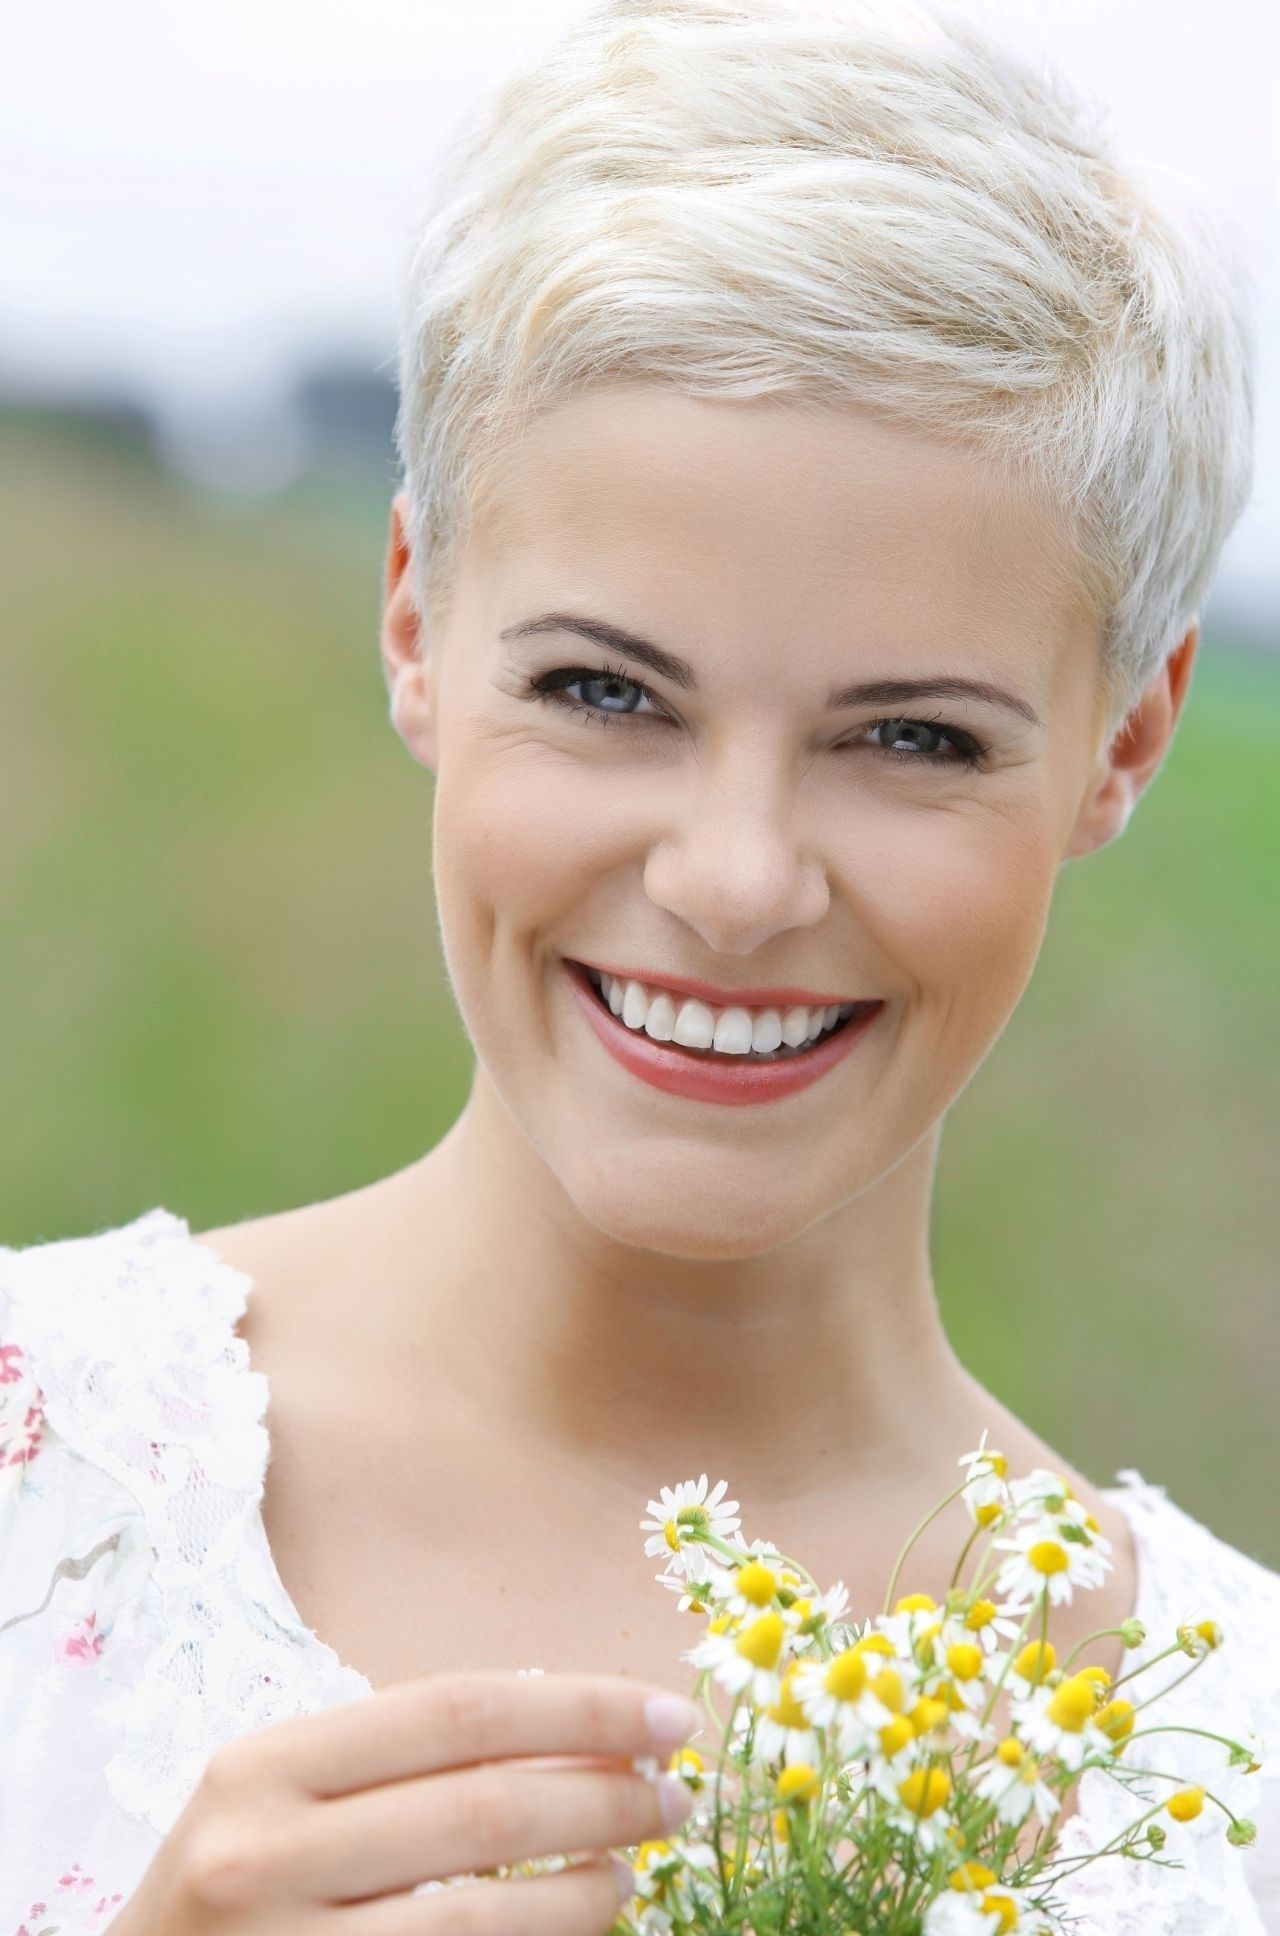 Short Pixie Haircut New Short Blonde Hairstyles Short Hairstyles Most Throughout Latest Short Blonde Pixie Hairstyles (View 6 of 15)